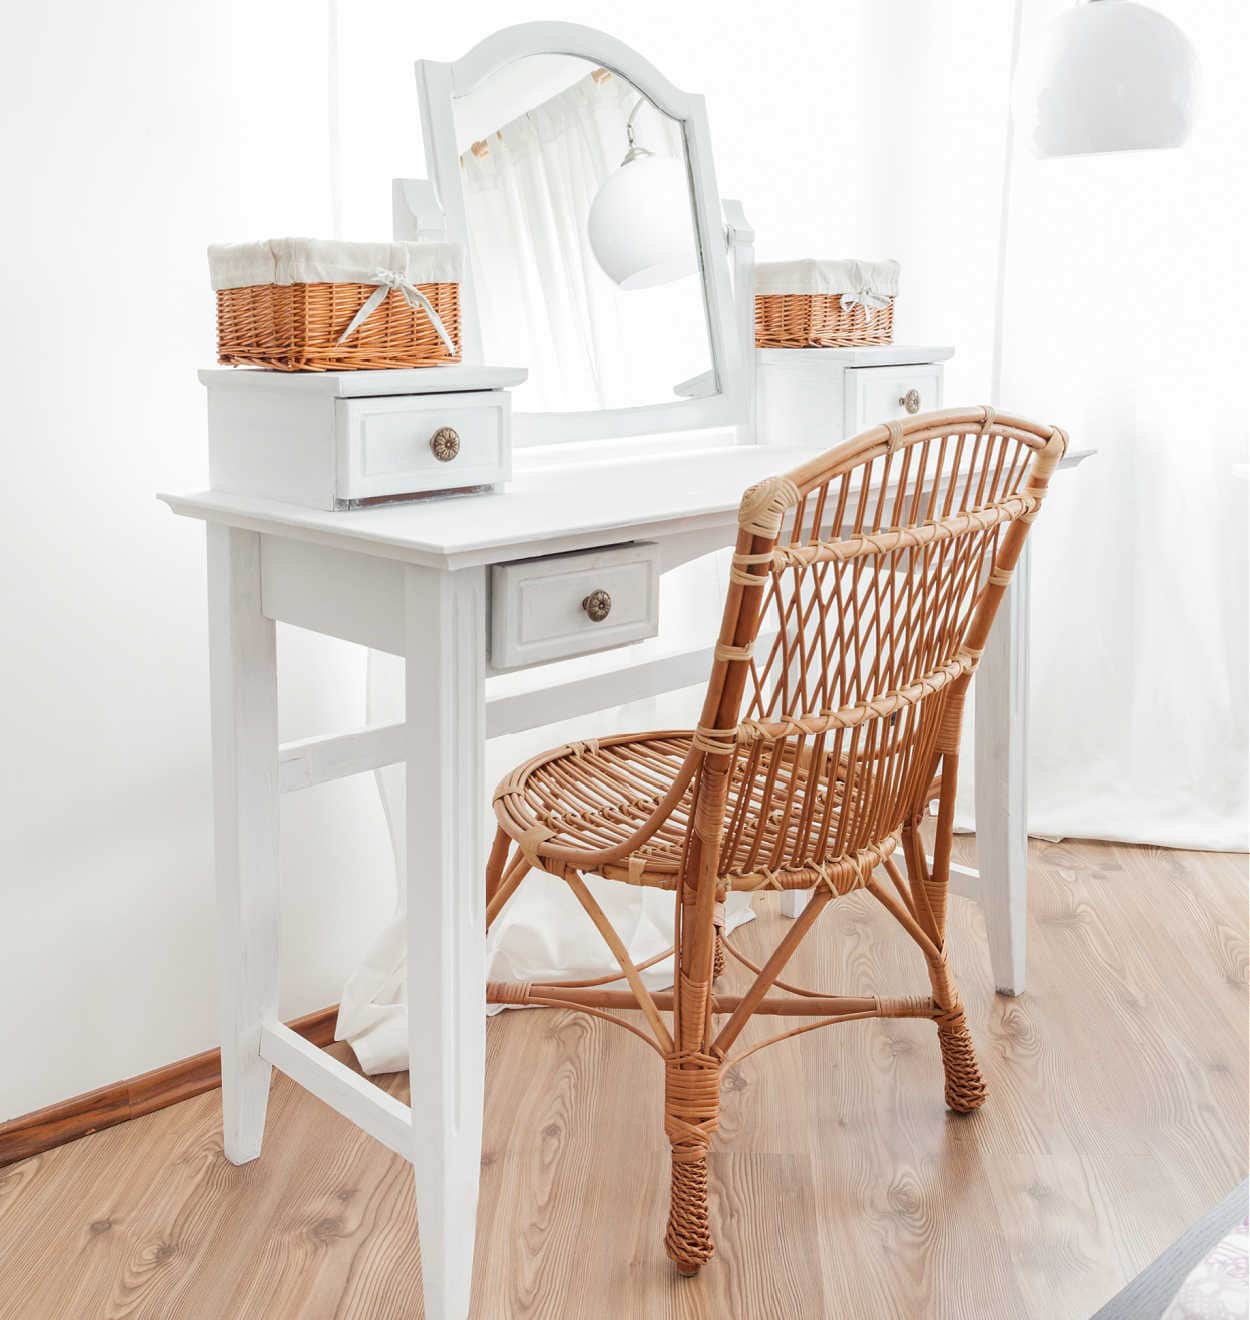 Dressing Table Storage Ideas for Stress-Free Mornings